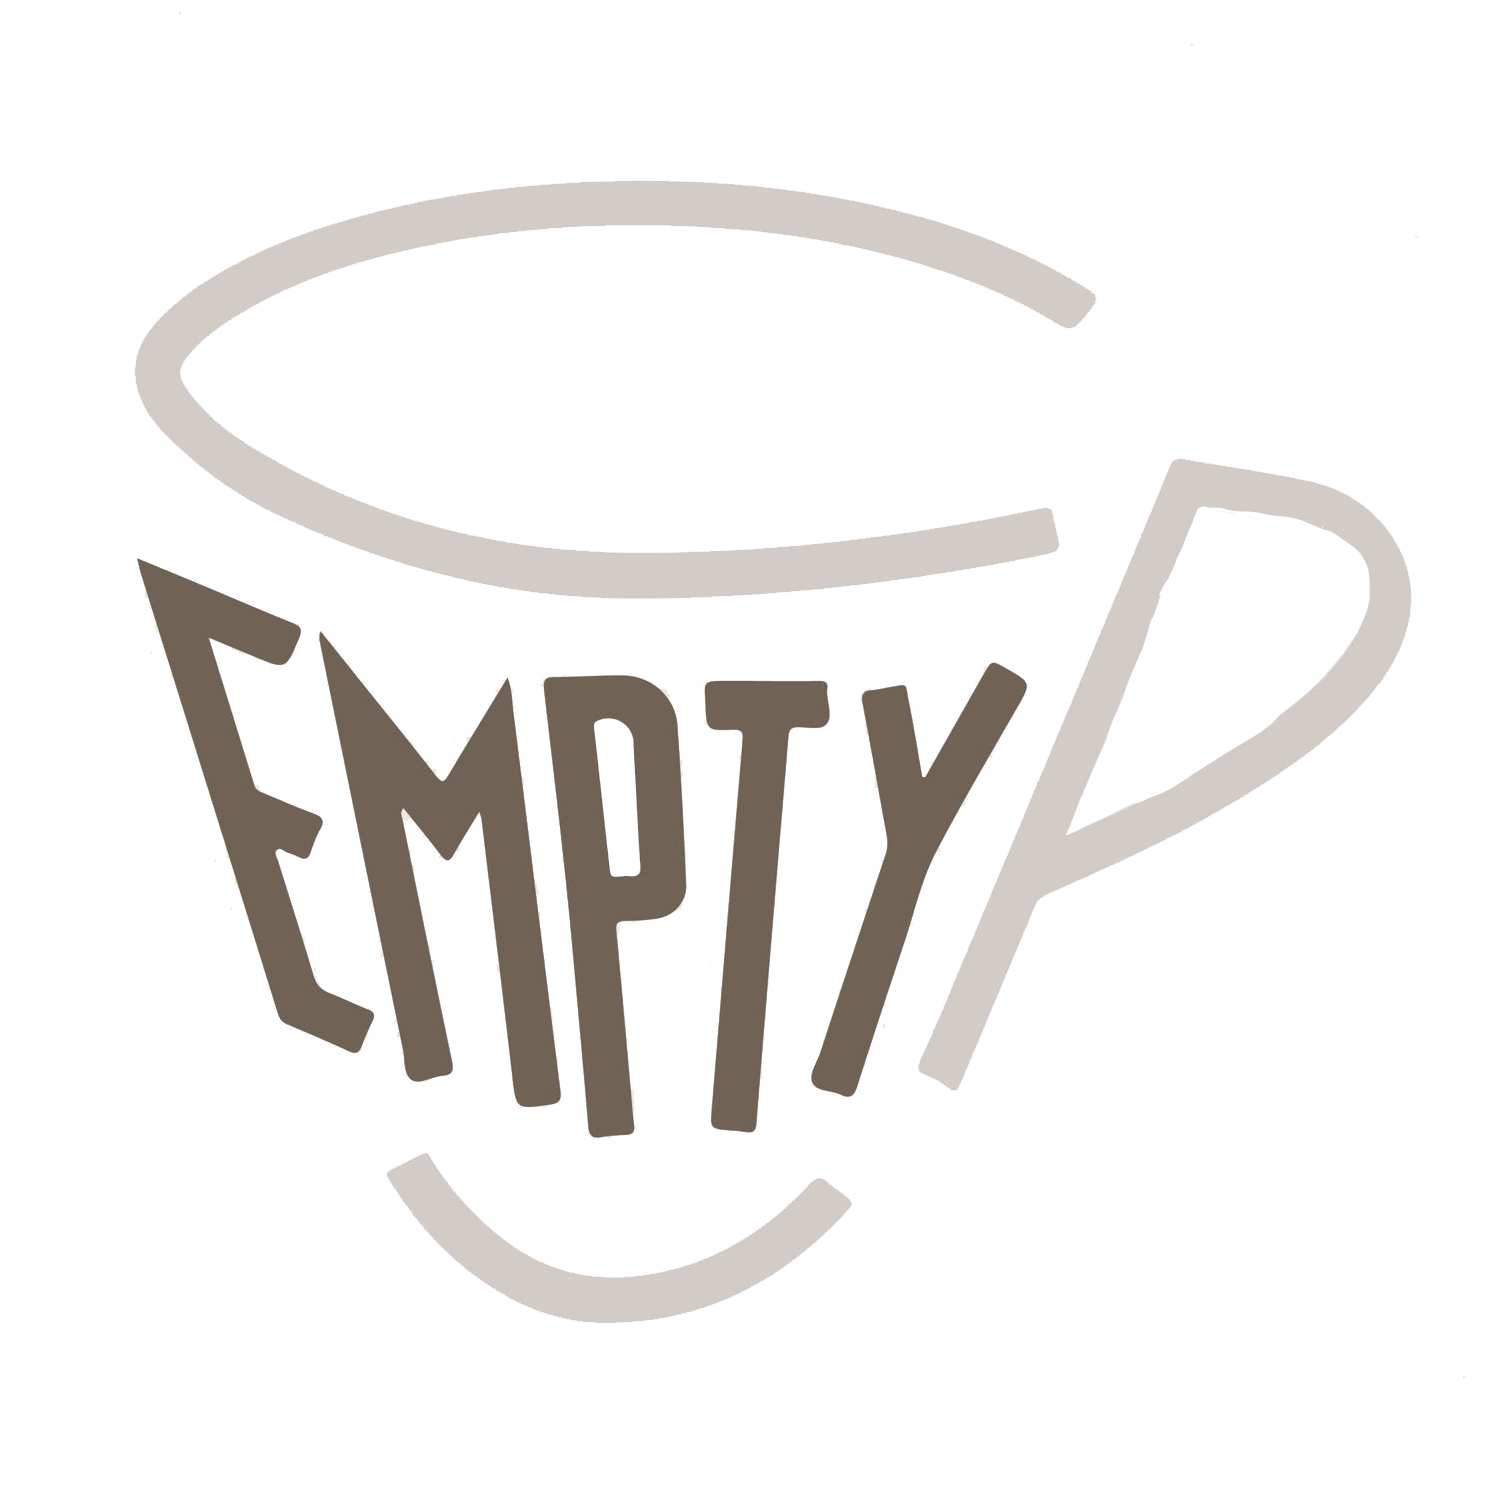 Empty Cup